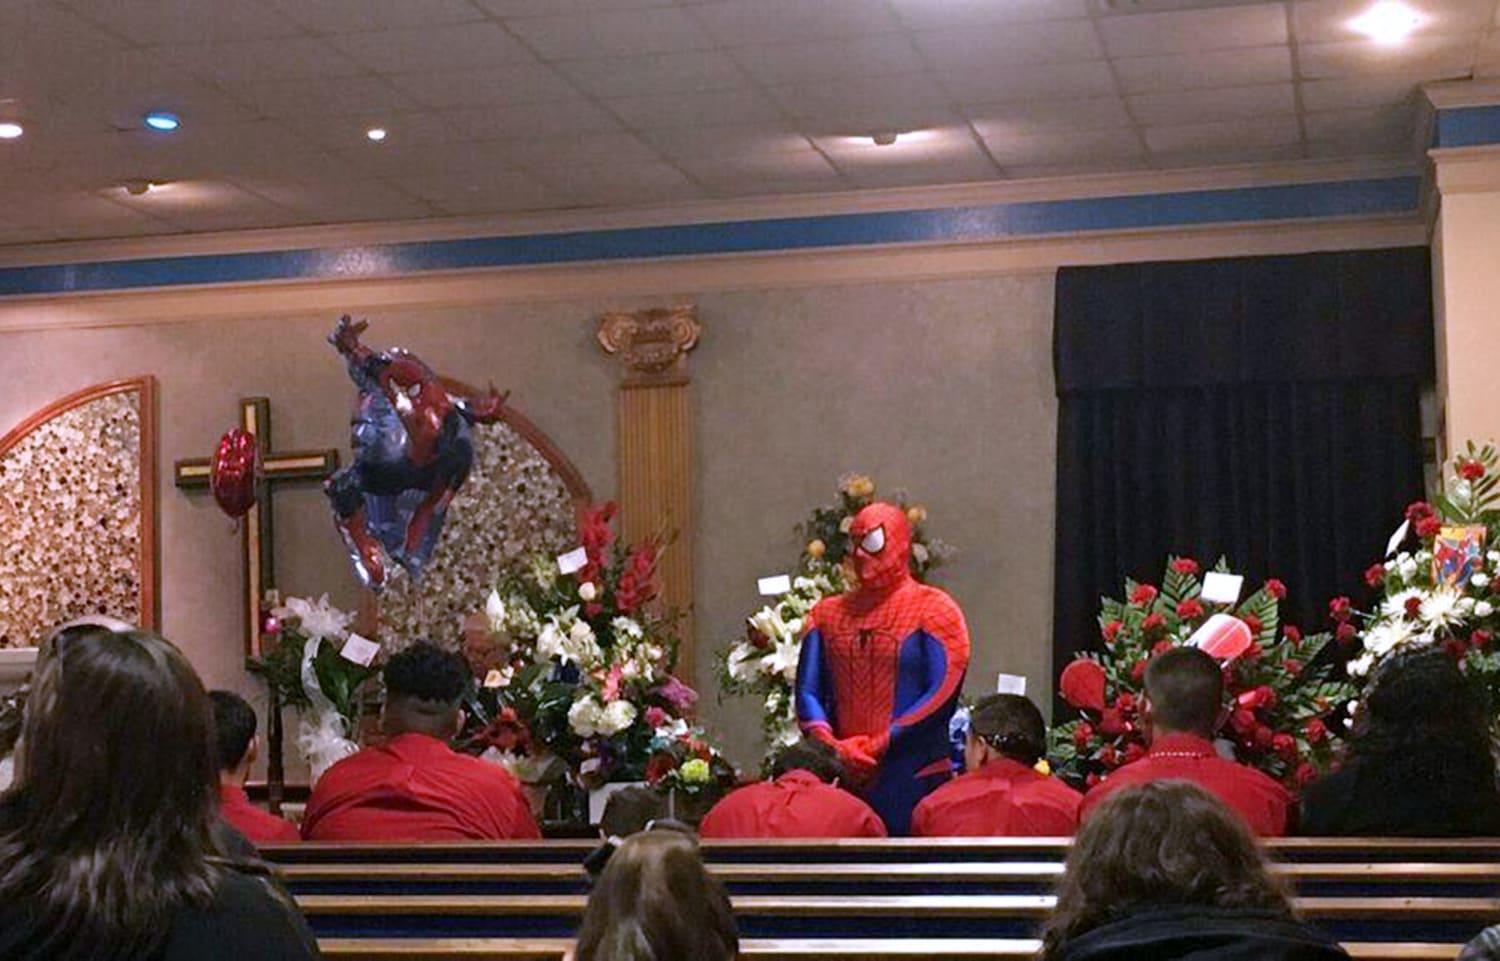 Cop dresses as Spider-Man at boy's funeral: 'I wish I had super powers to  save him'